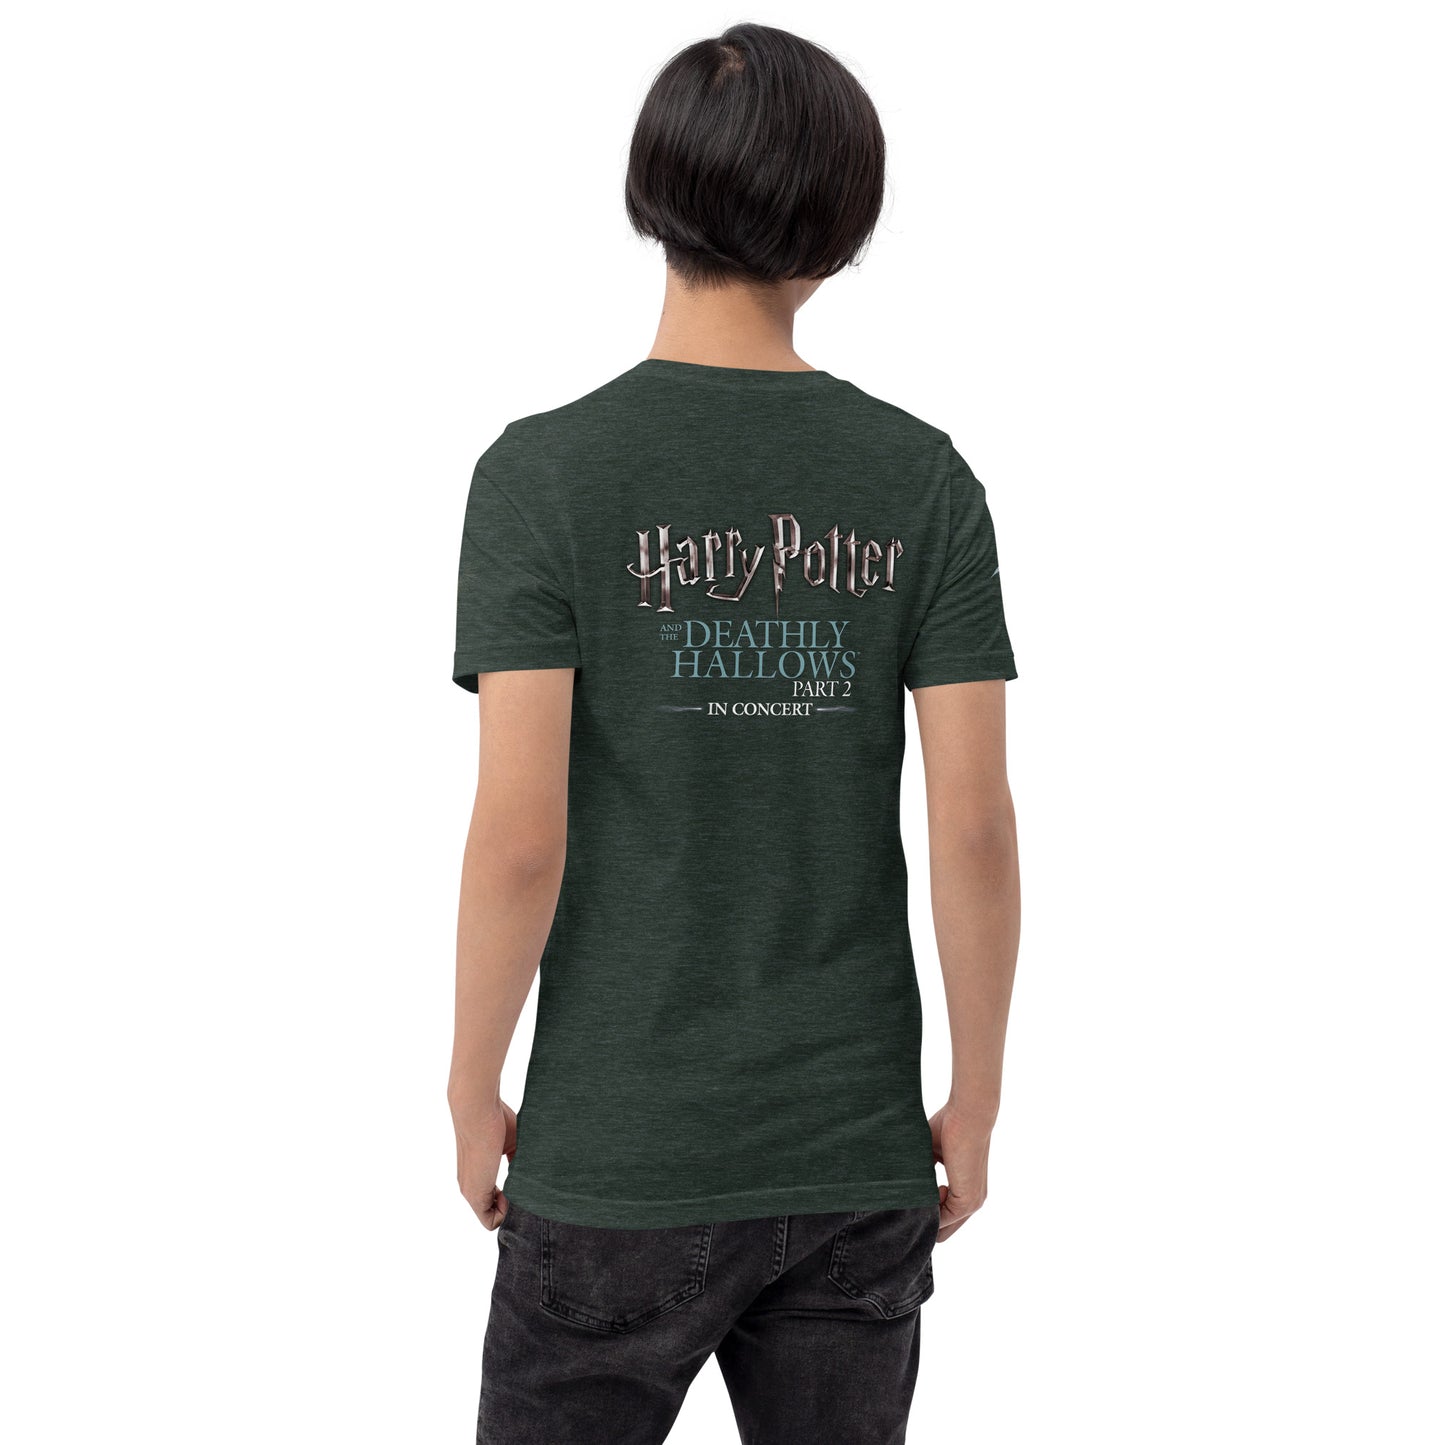 Harry Potter and the Deathly Hallows™ - Part 2 Unisex T-Shirt (Neville)